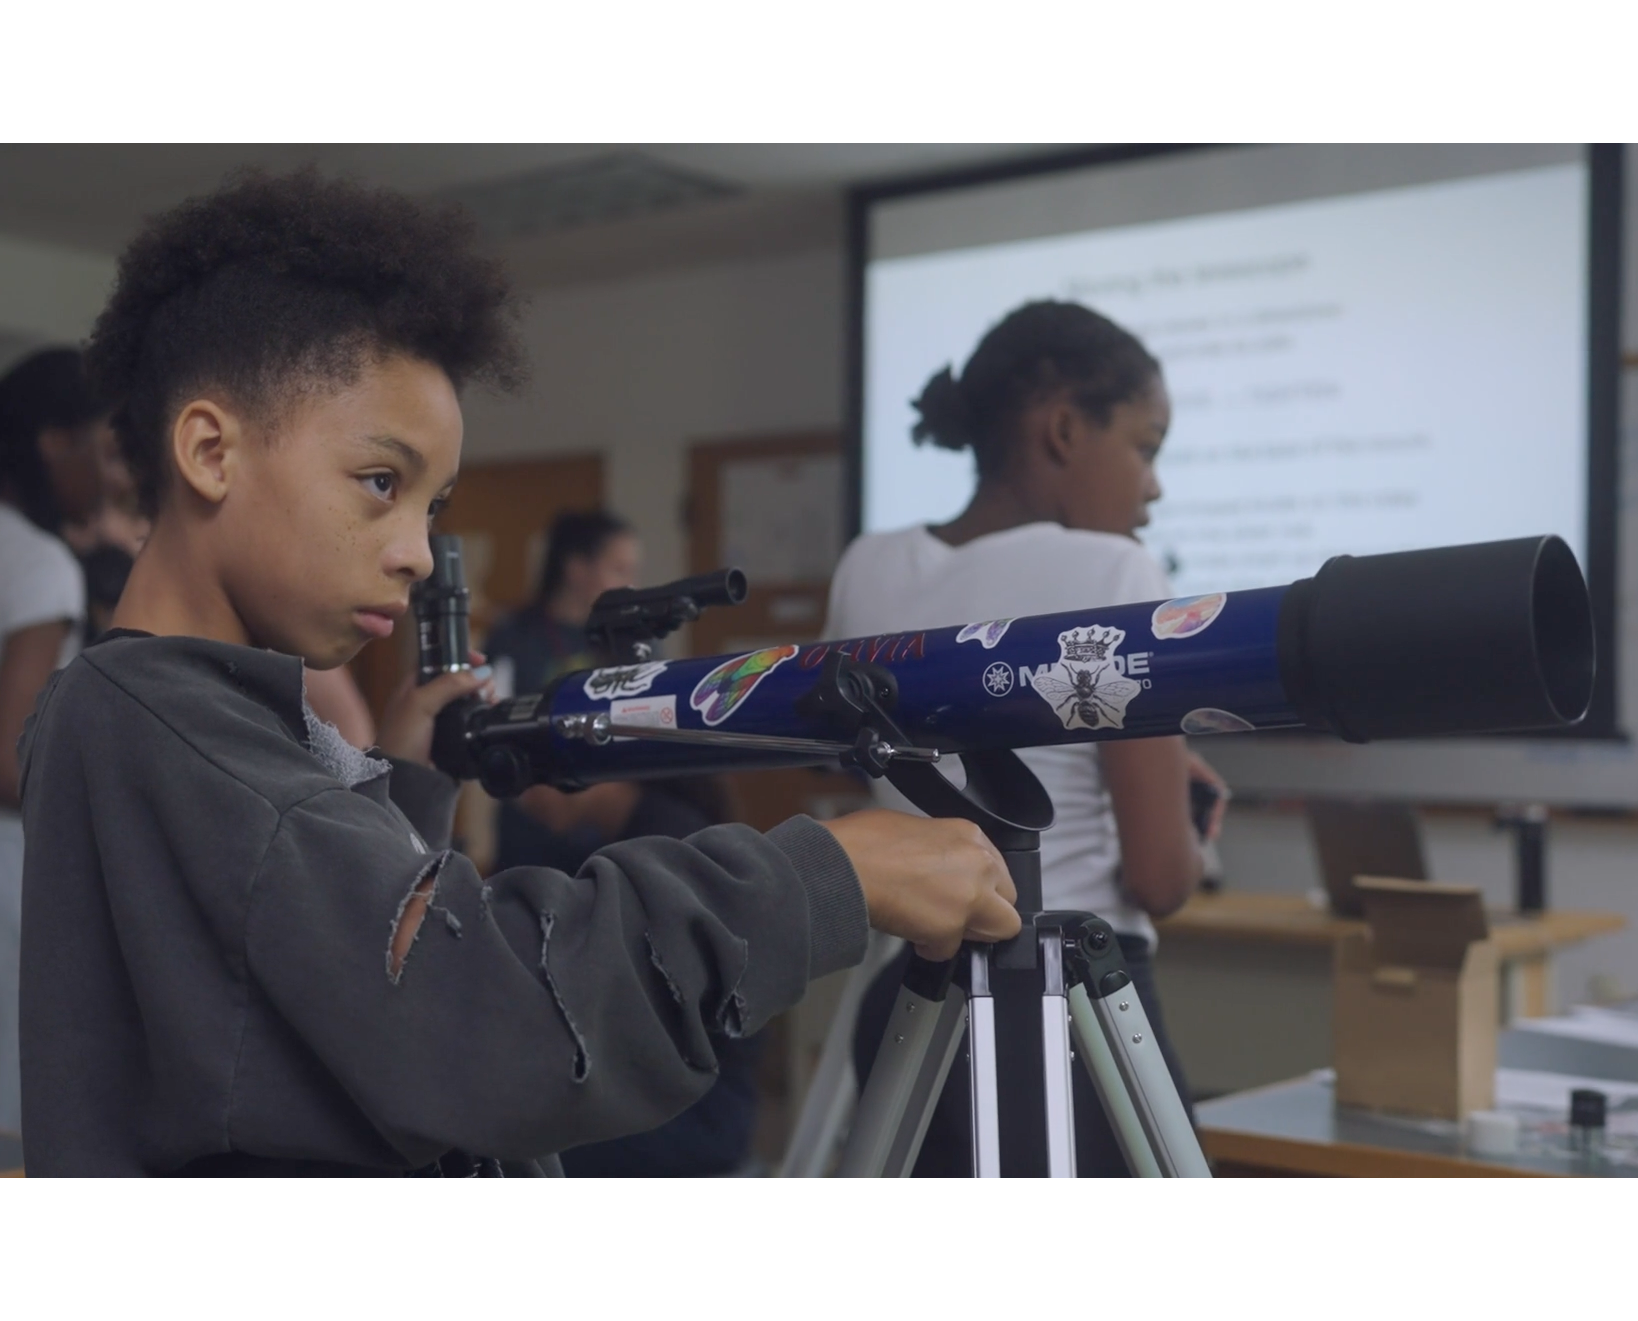 A young girl adjusts a large blue telescope in a classroom.